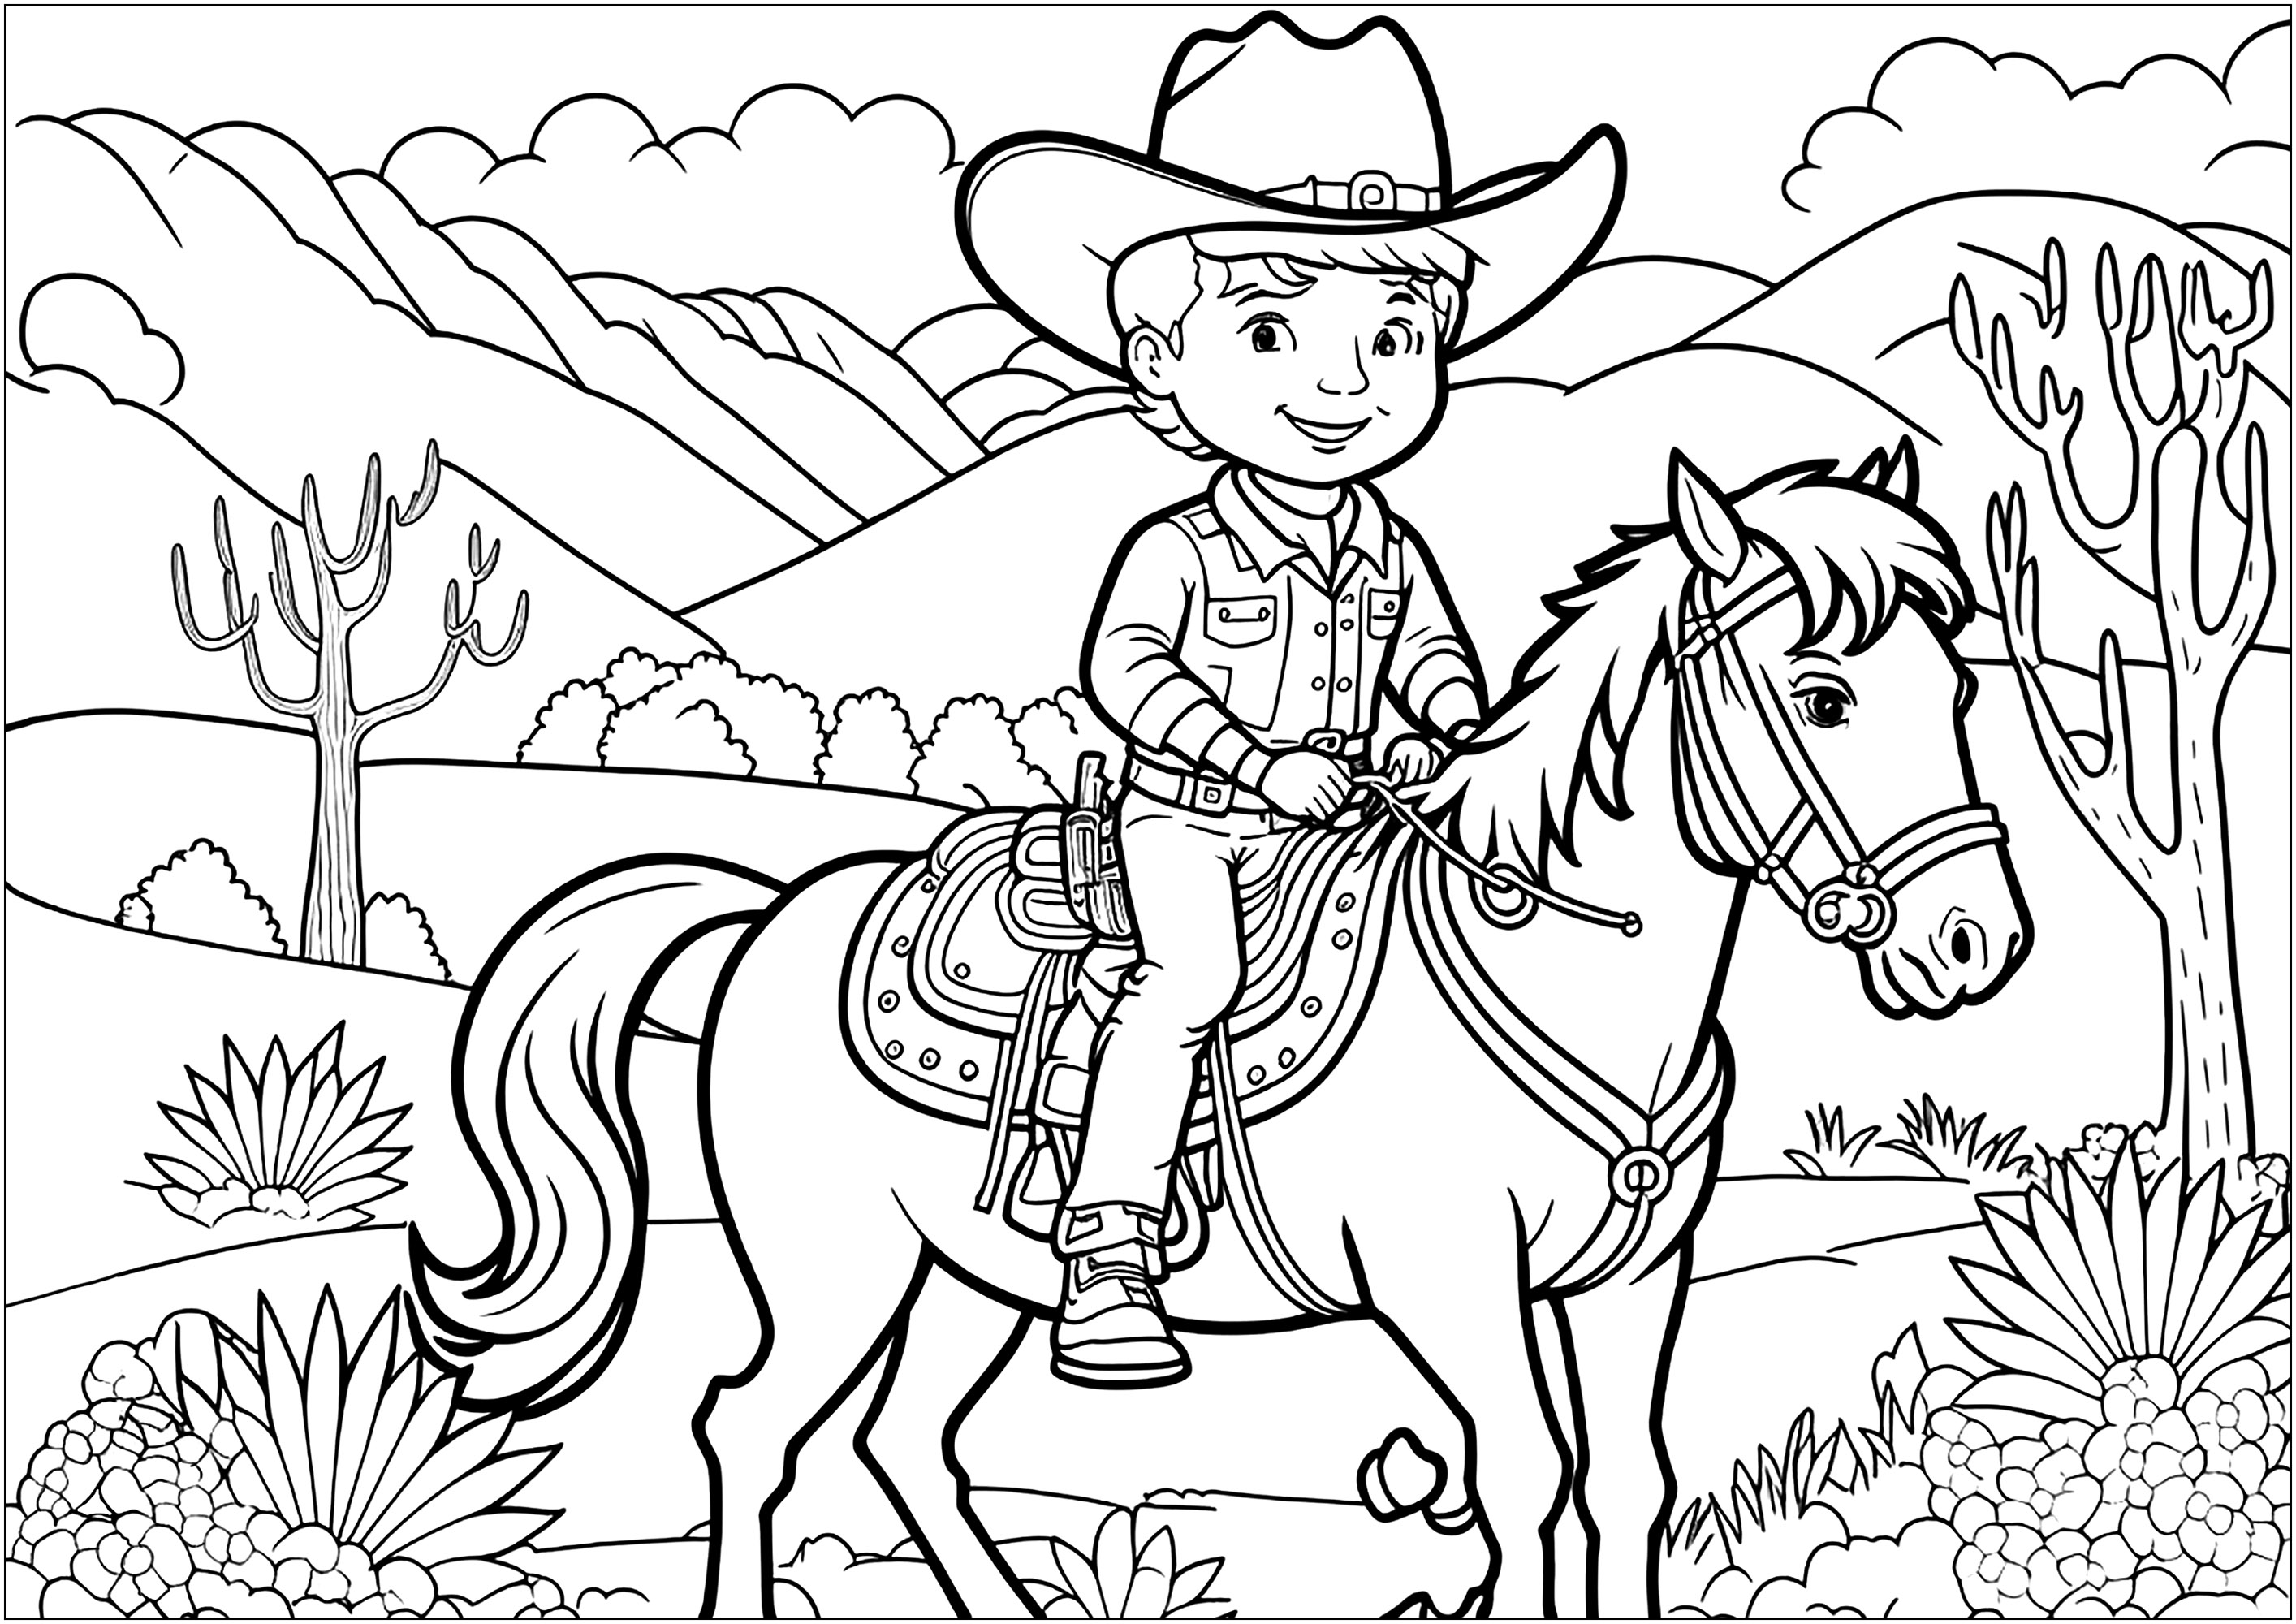 Cowboy and his horse - Cow-boys Kids Coloring Pages